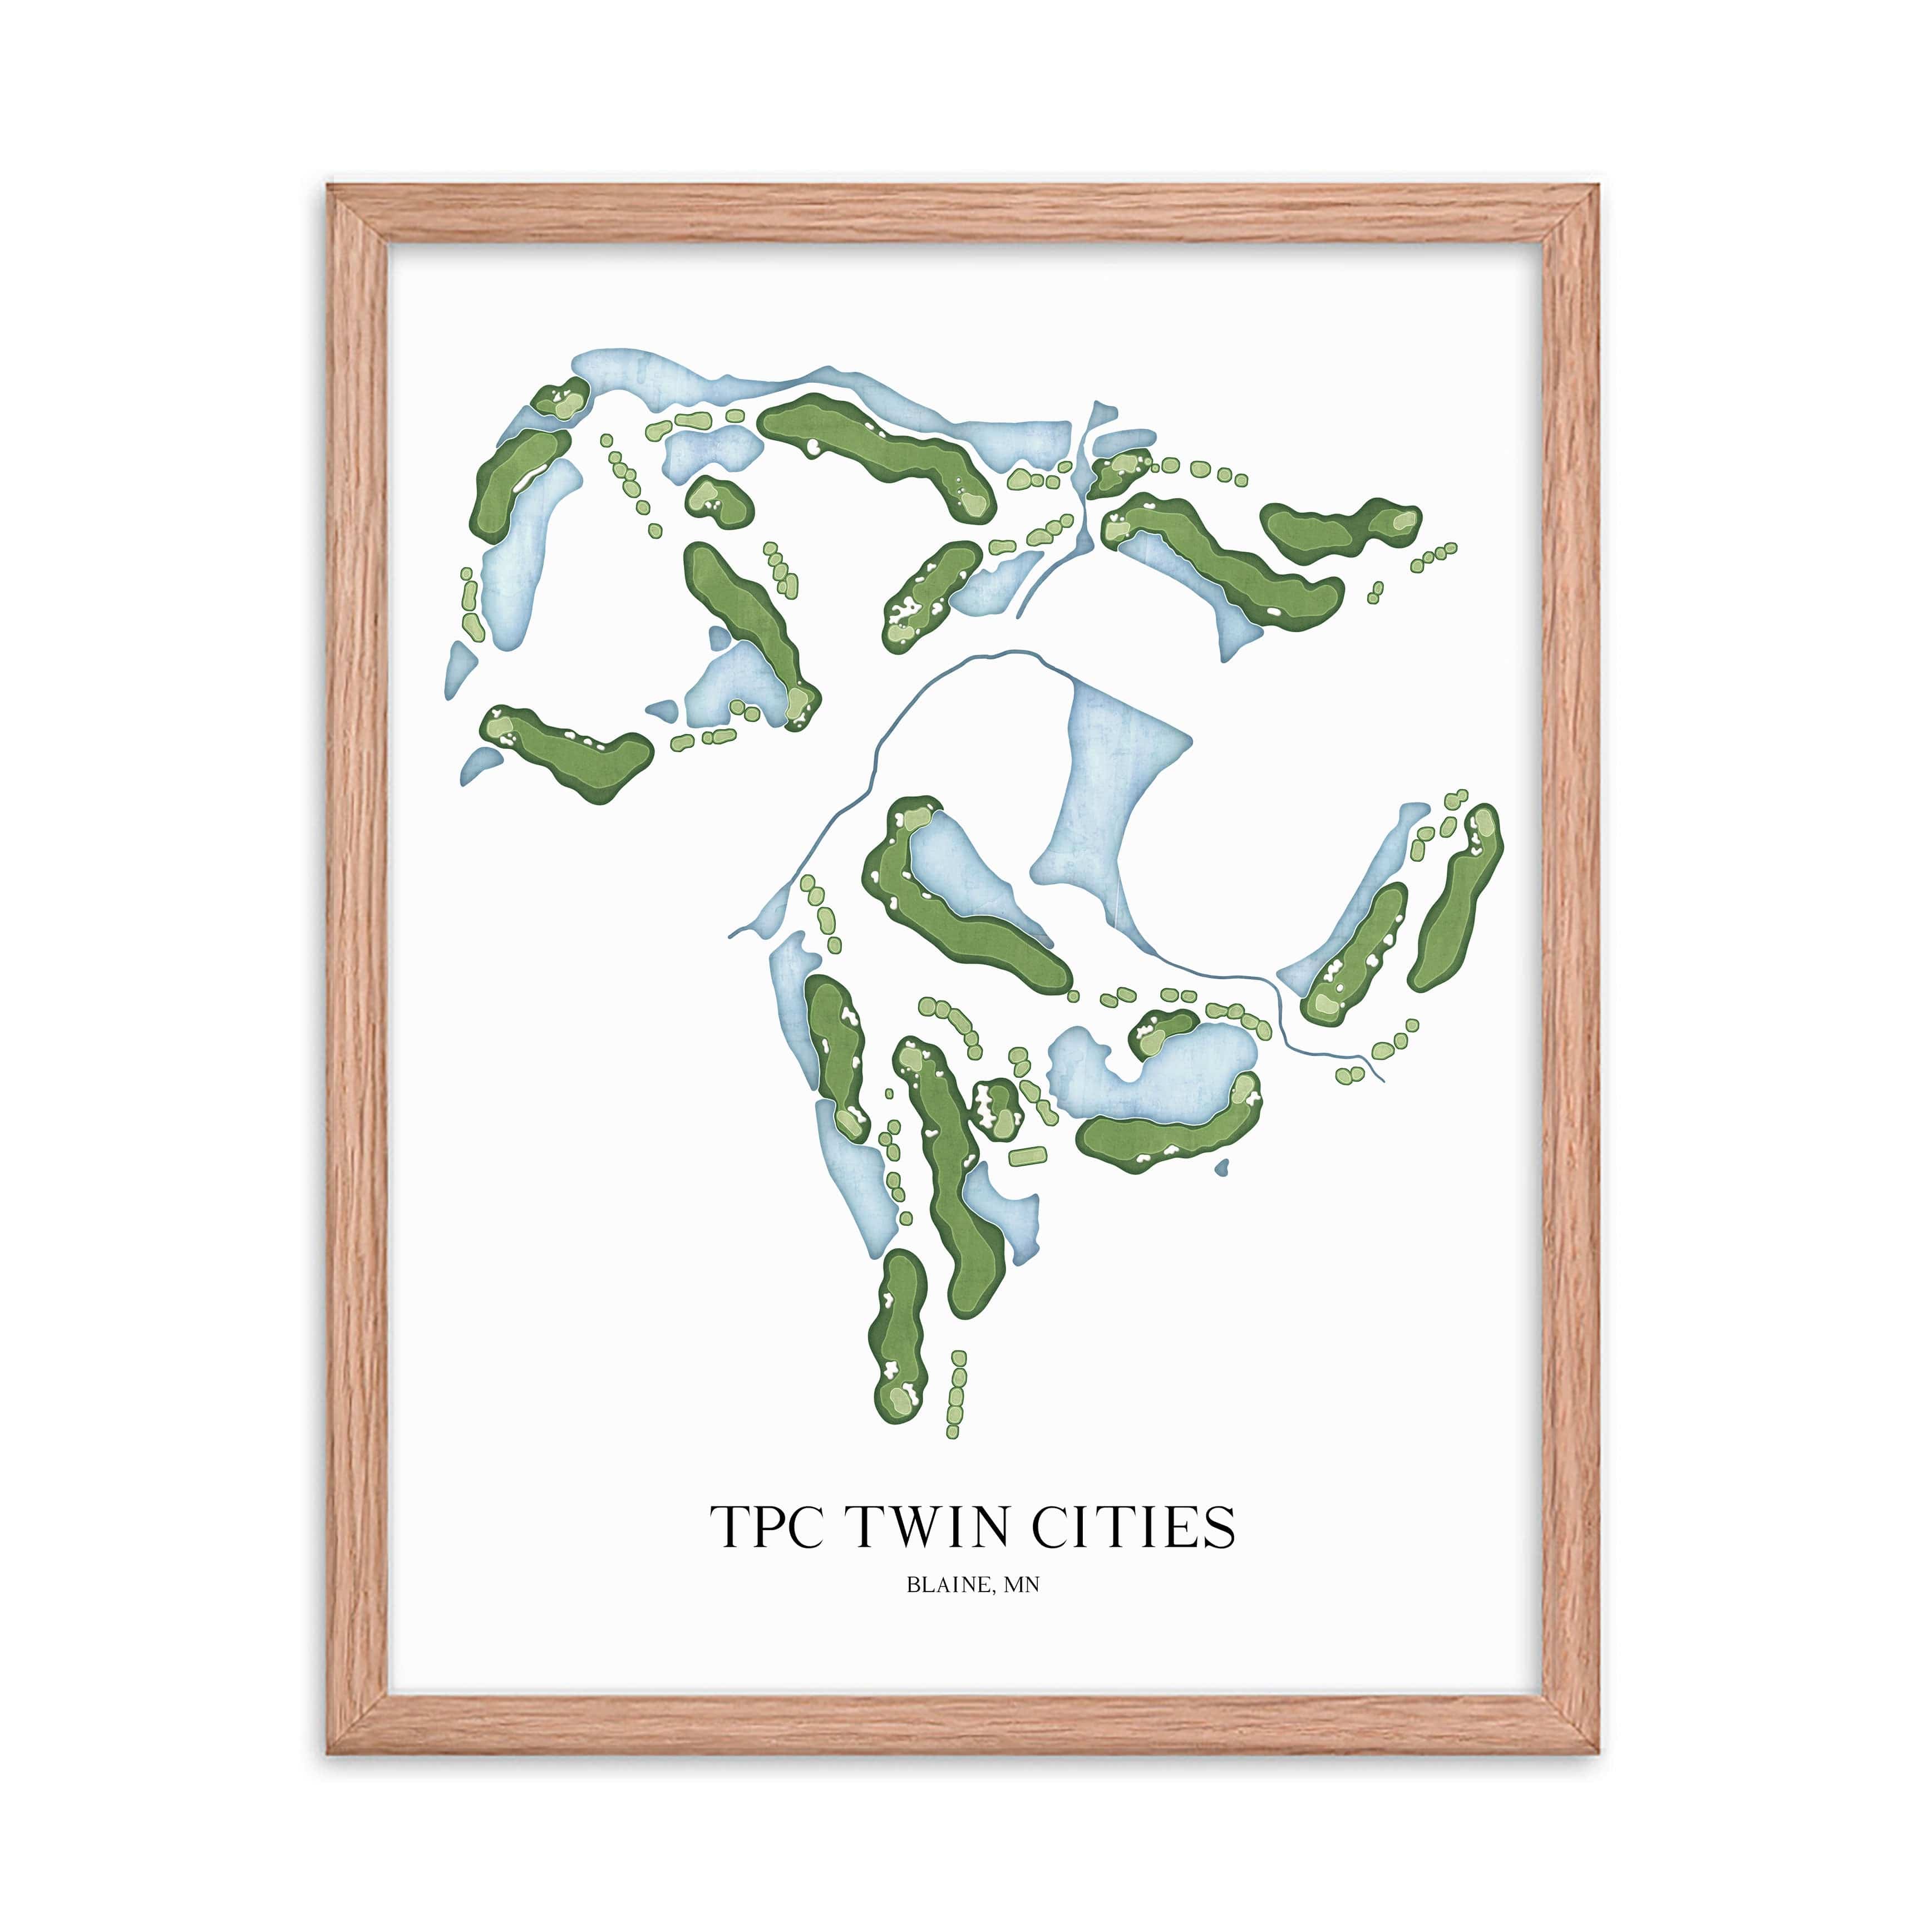 The 19th Hole Golf Shop - Golf Course Prints -  TPC Twin Cities Golf Course Map